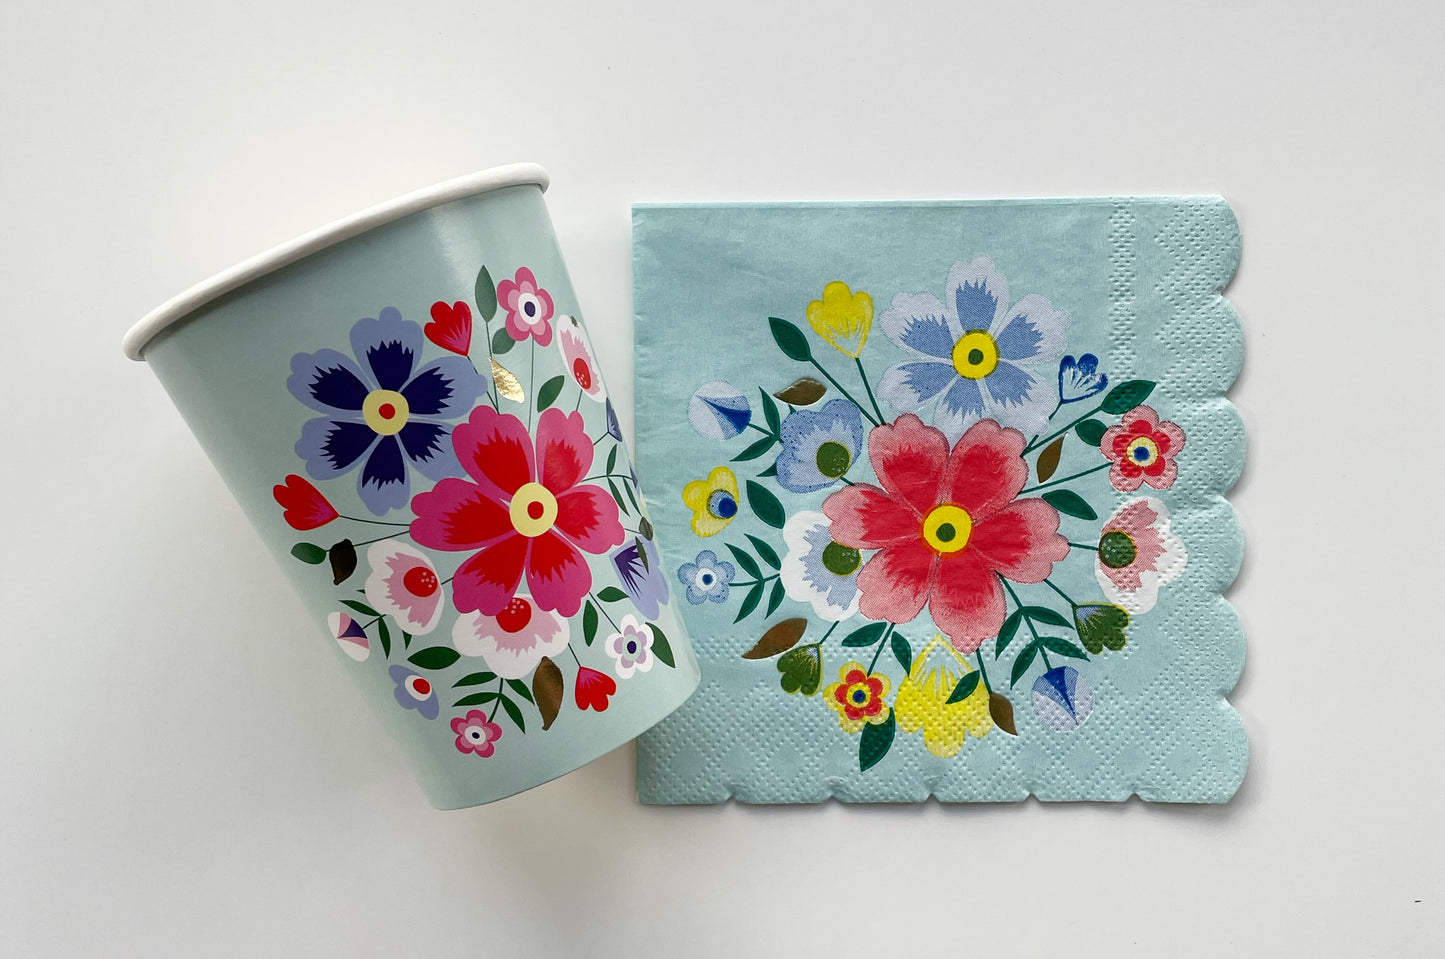 The Blossom Party Kit paper party napkins and paper cups. The flower/floral pattern includes green, red and blue colours. The napkins have scalloped edges.